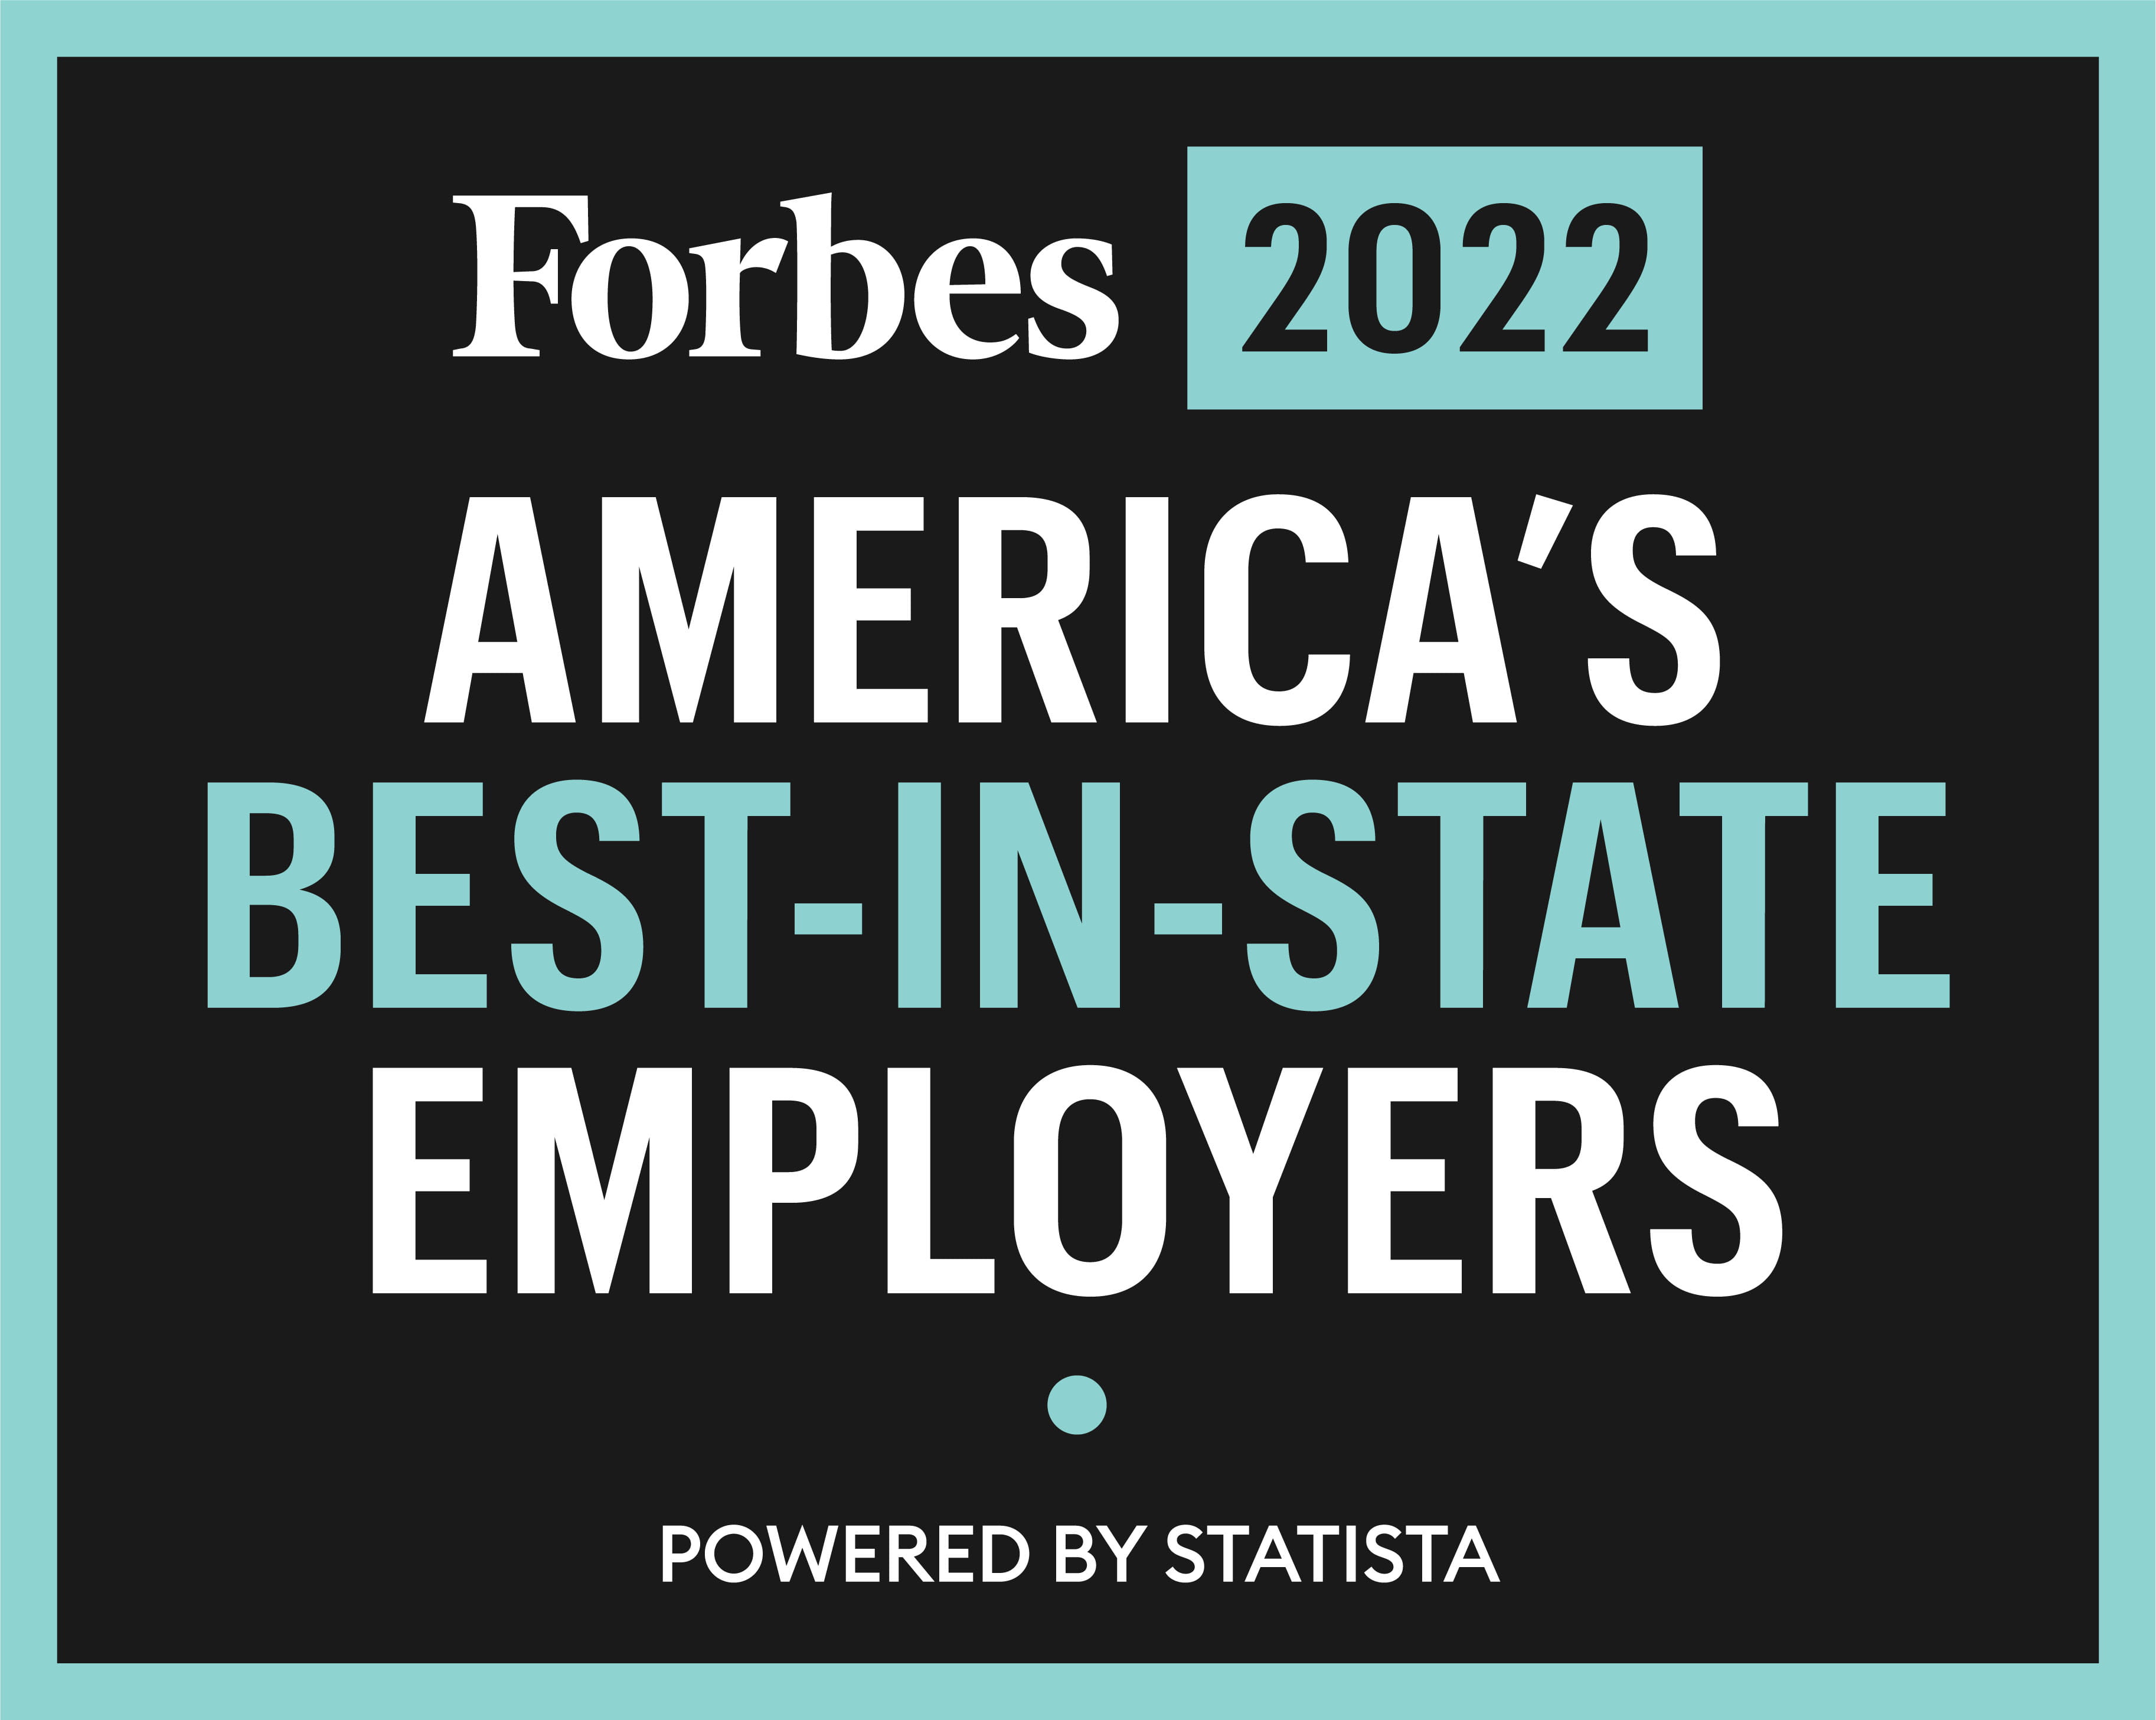 Blue and white text on a black background reading: Forbes 2022 America's Best-in-State Employers.